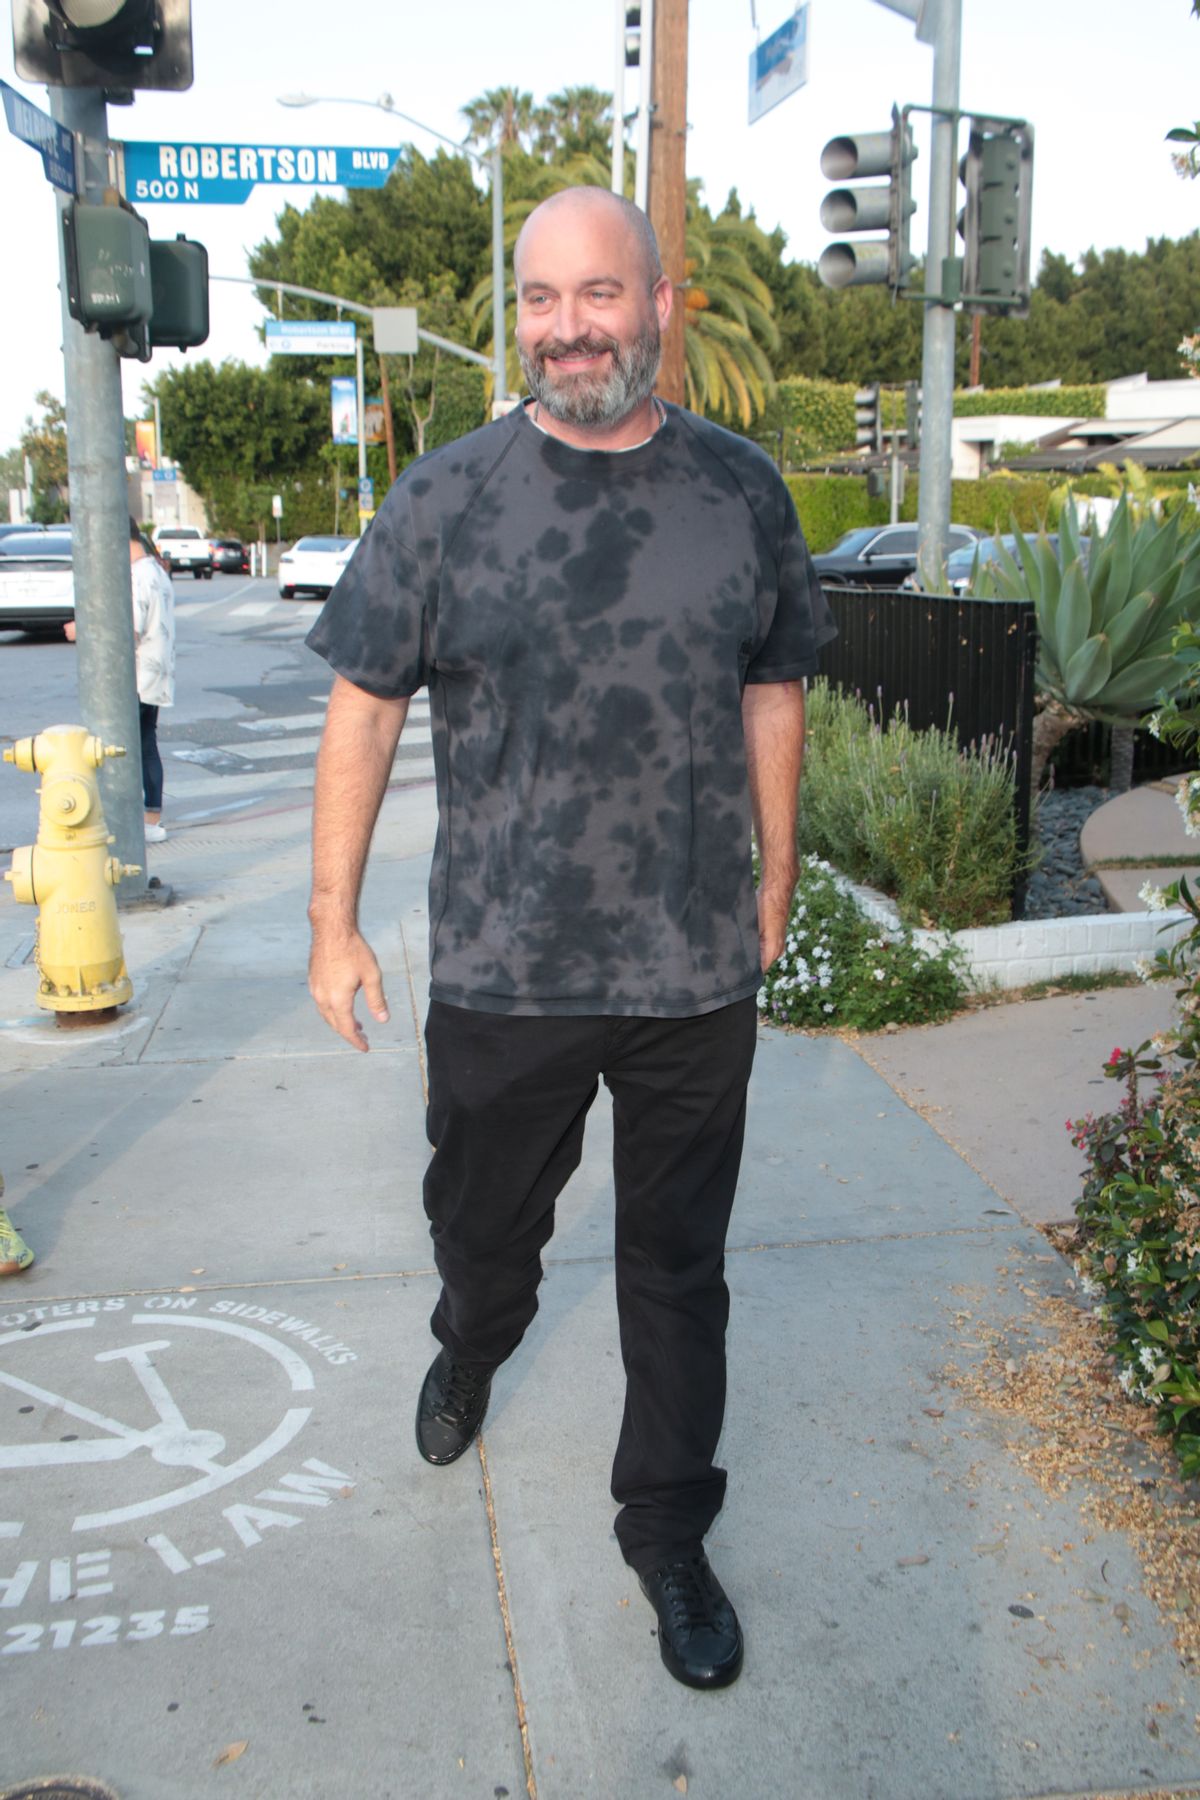 LOS ANGELES, CA - JUNE 15:  Tom Segura is seen on June 15, 2021 in Los Angeles, California.  (Photo by GP/Star Max/GC Images) (GP/Star Max/GC Images)